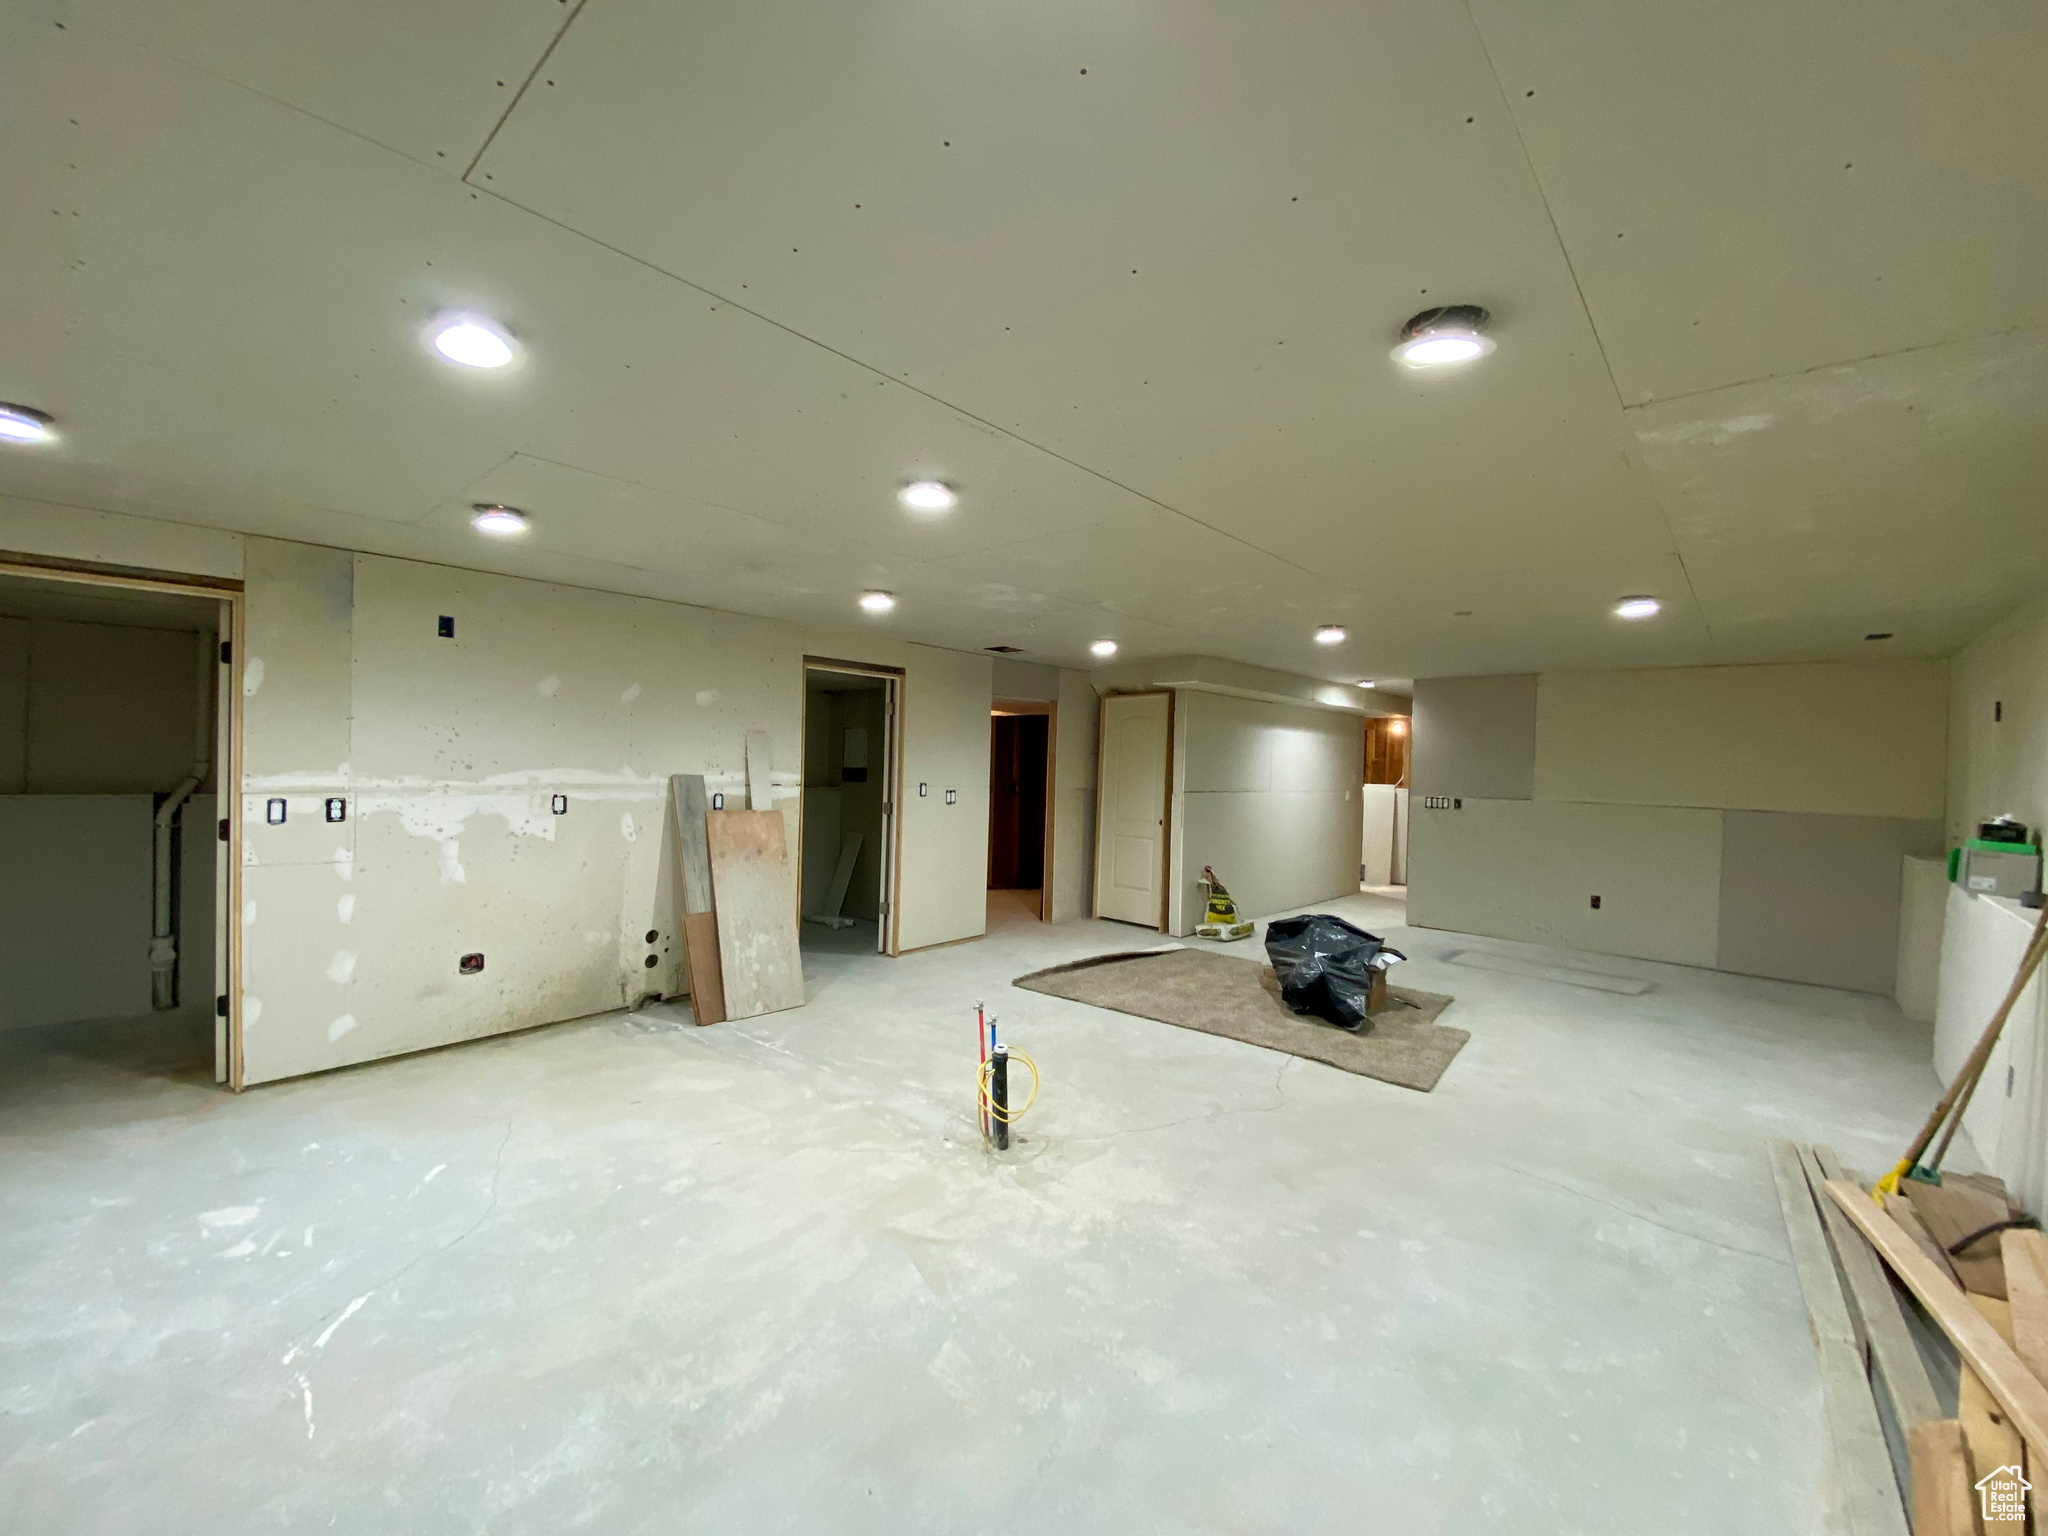 Basement living area with rough in plumbing for a kitchenette